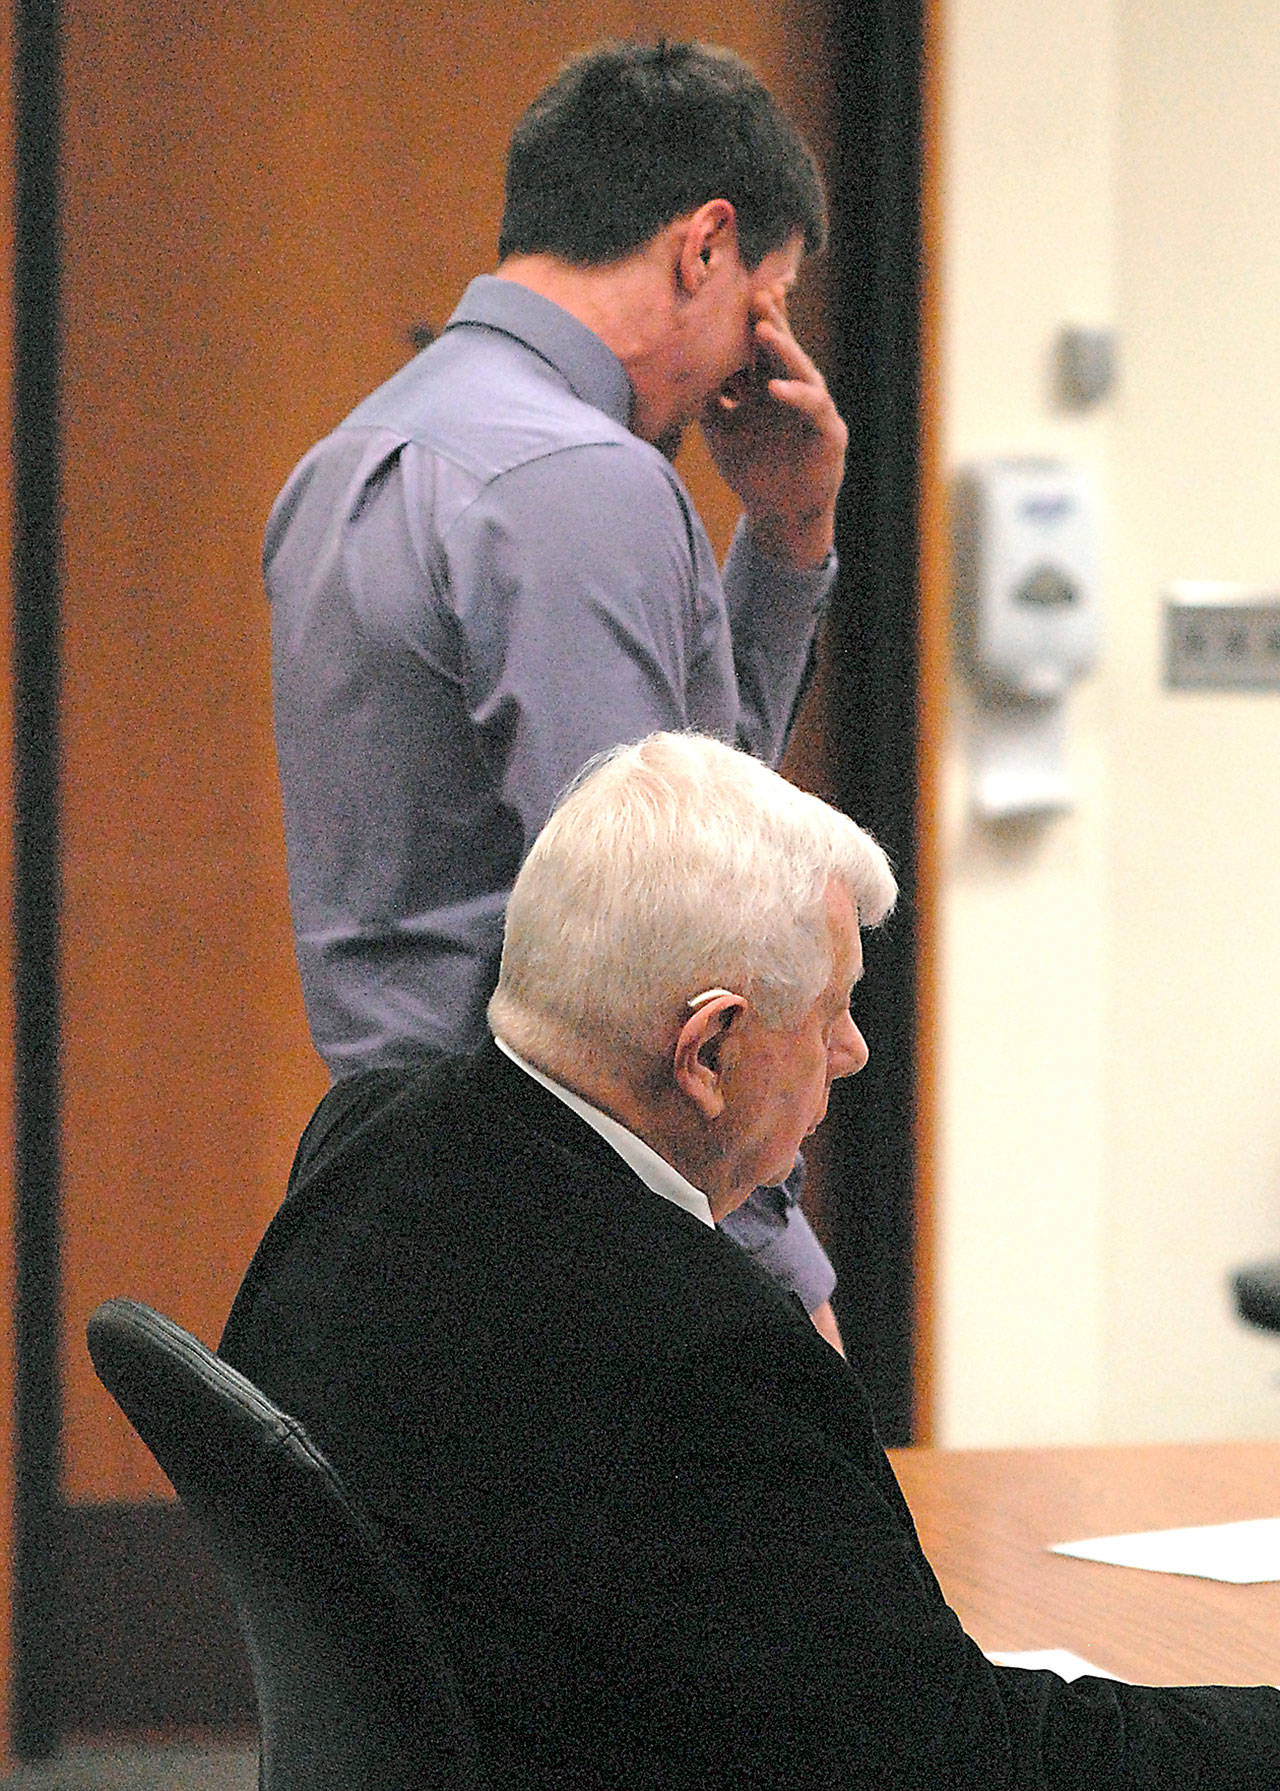 Zachary A. Fletcher breaks down in tears while speaking for himself during Wednesday’s sentencing hearing on two counts of vehicular homicide. Seated is attorney Larry Freedman. (Keith Thorpe/Peninsula Daily News)